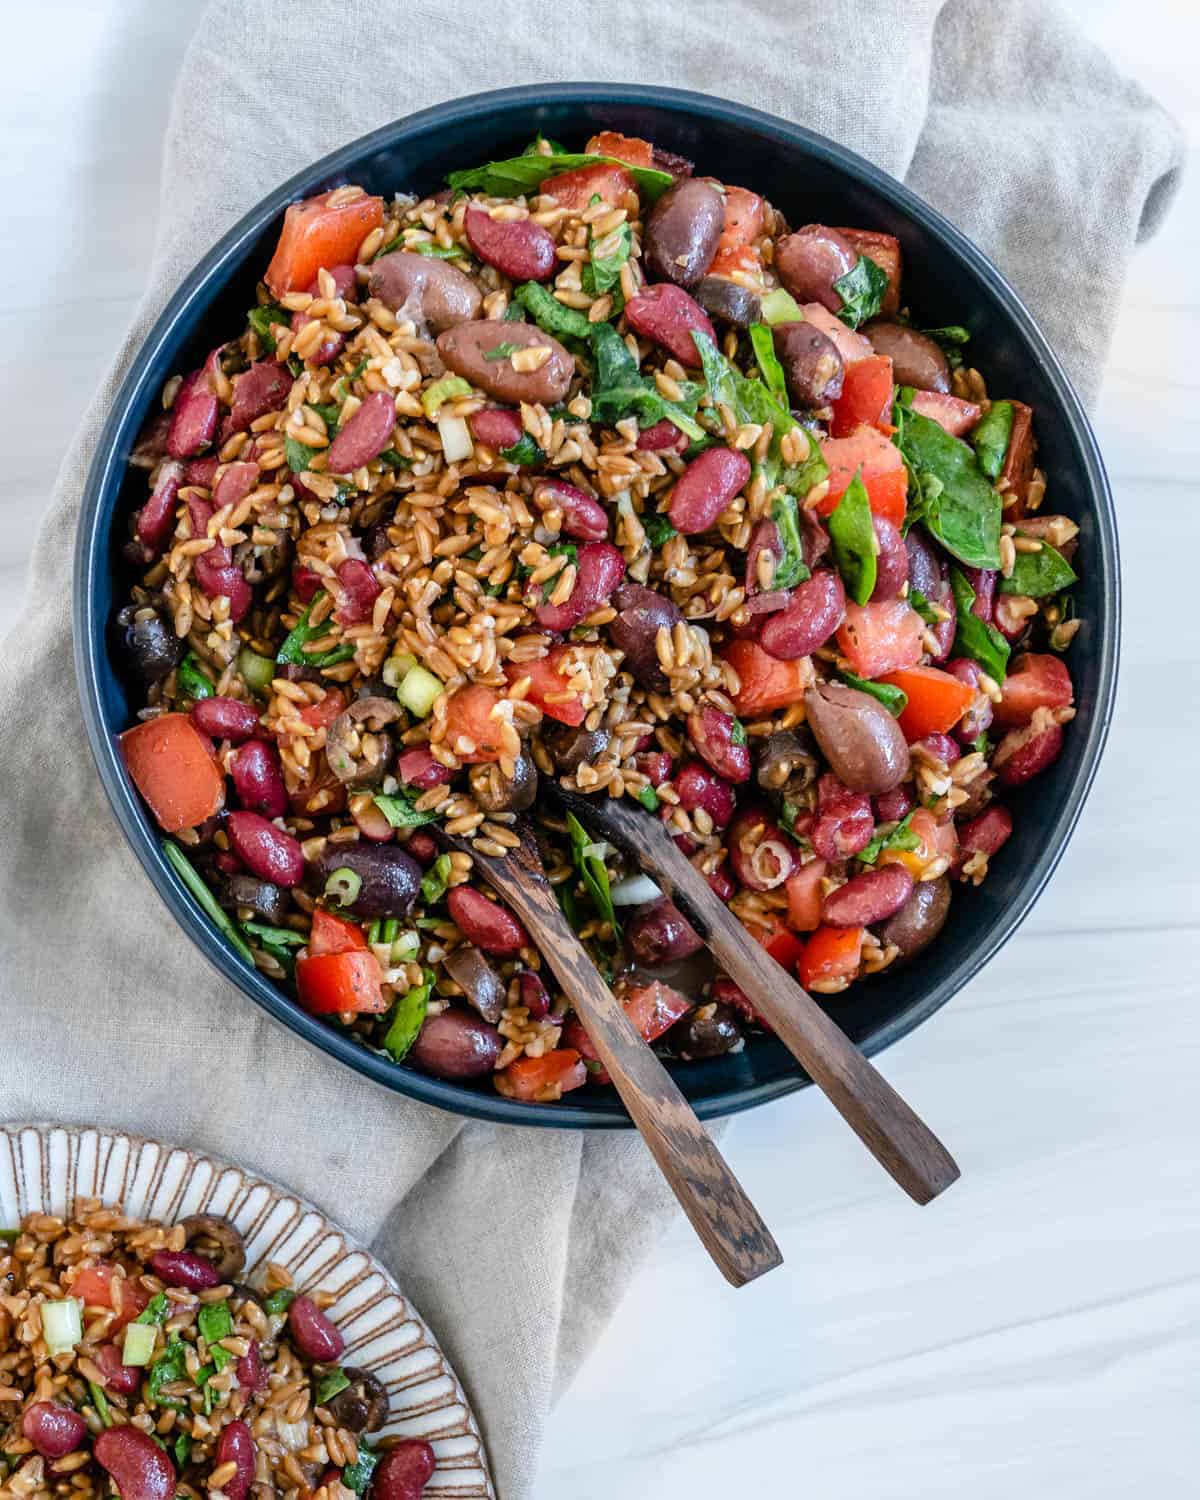 completed Colorful Farro Salad in a blue bowl with utensils in it against a light background